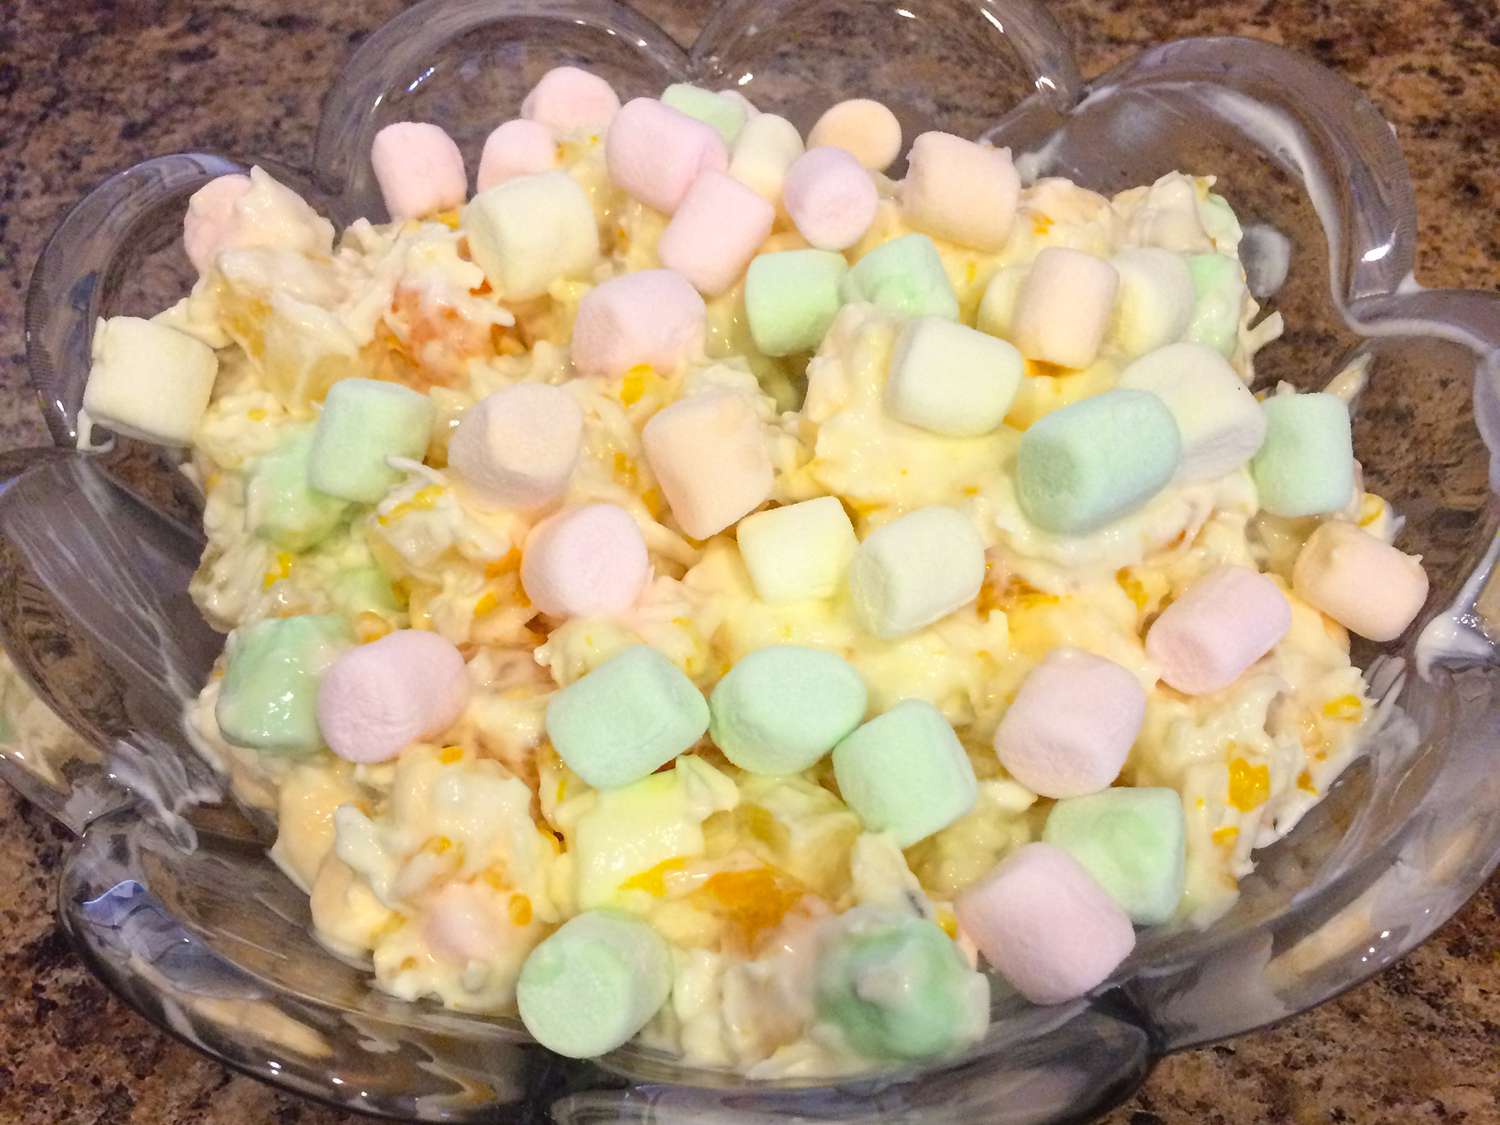 Close up view of a bowl with marshmallows, coconut pieces, sour cream, and mandarin pieces in a glass bowl